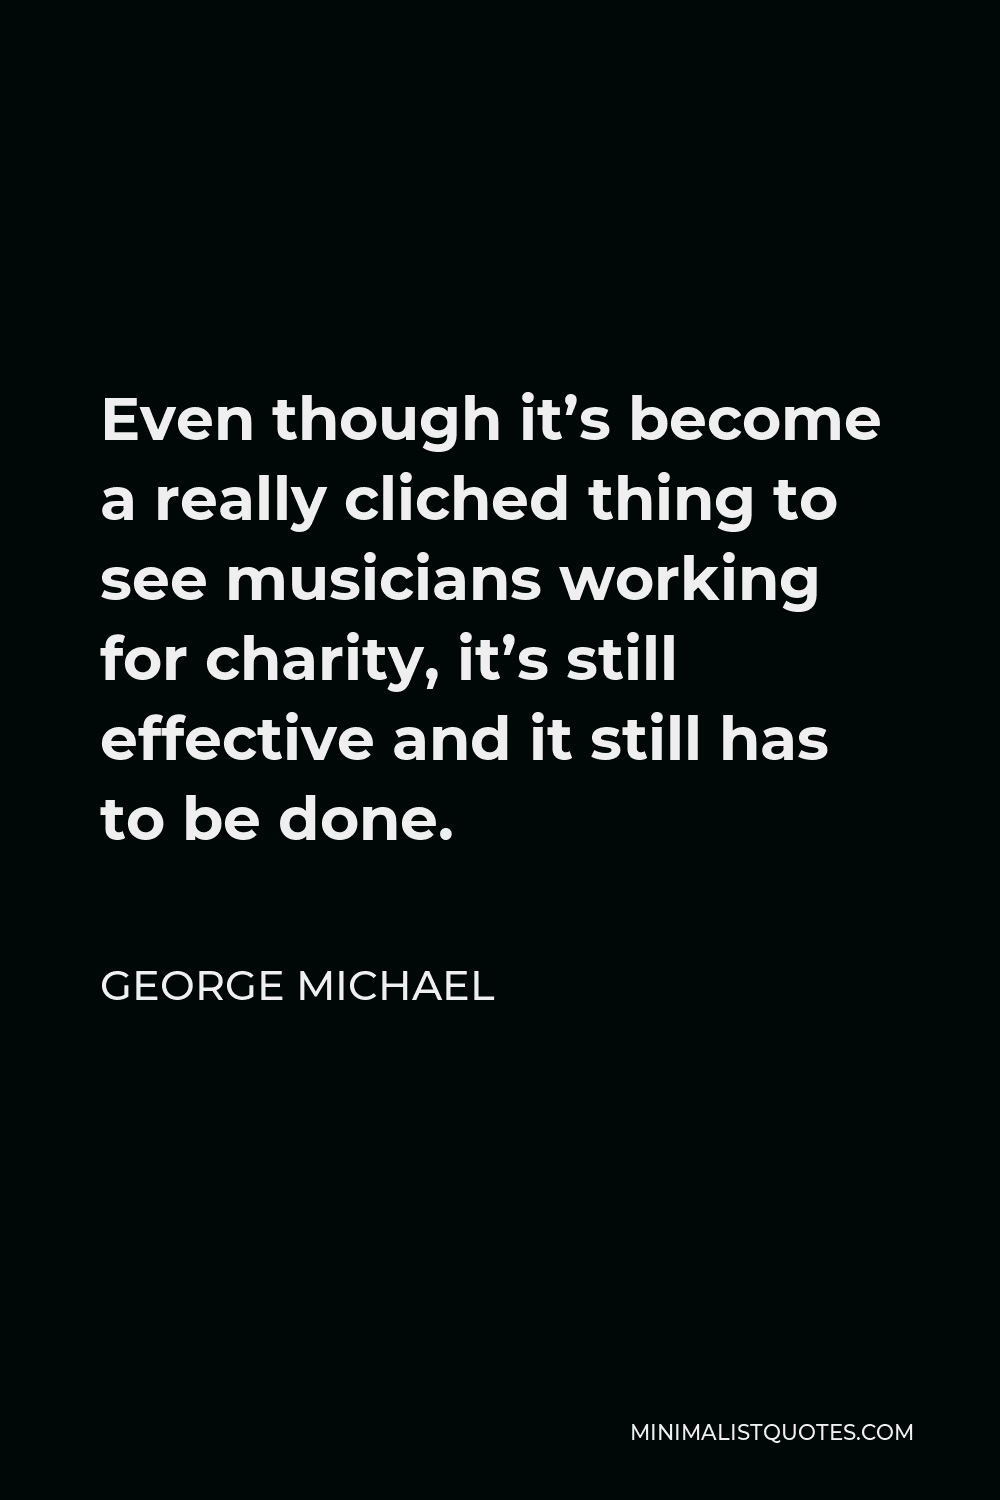 George Michael Quote - Even though it’s become a really cliched thing to see musicians working for charity, it’s still effective and it still has to be done.